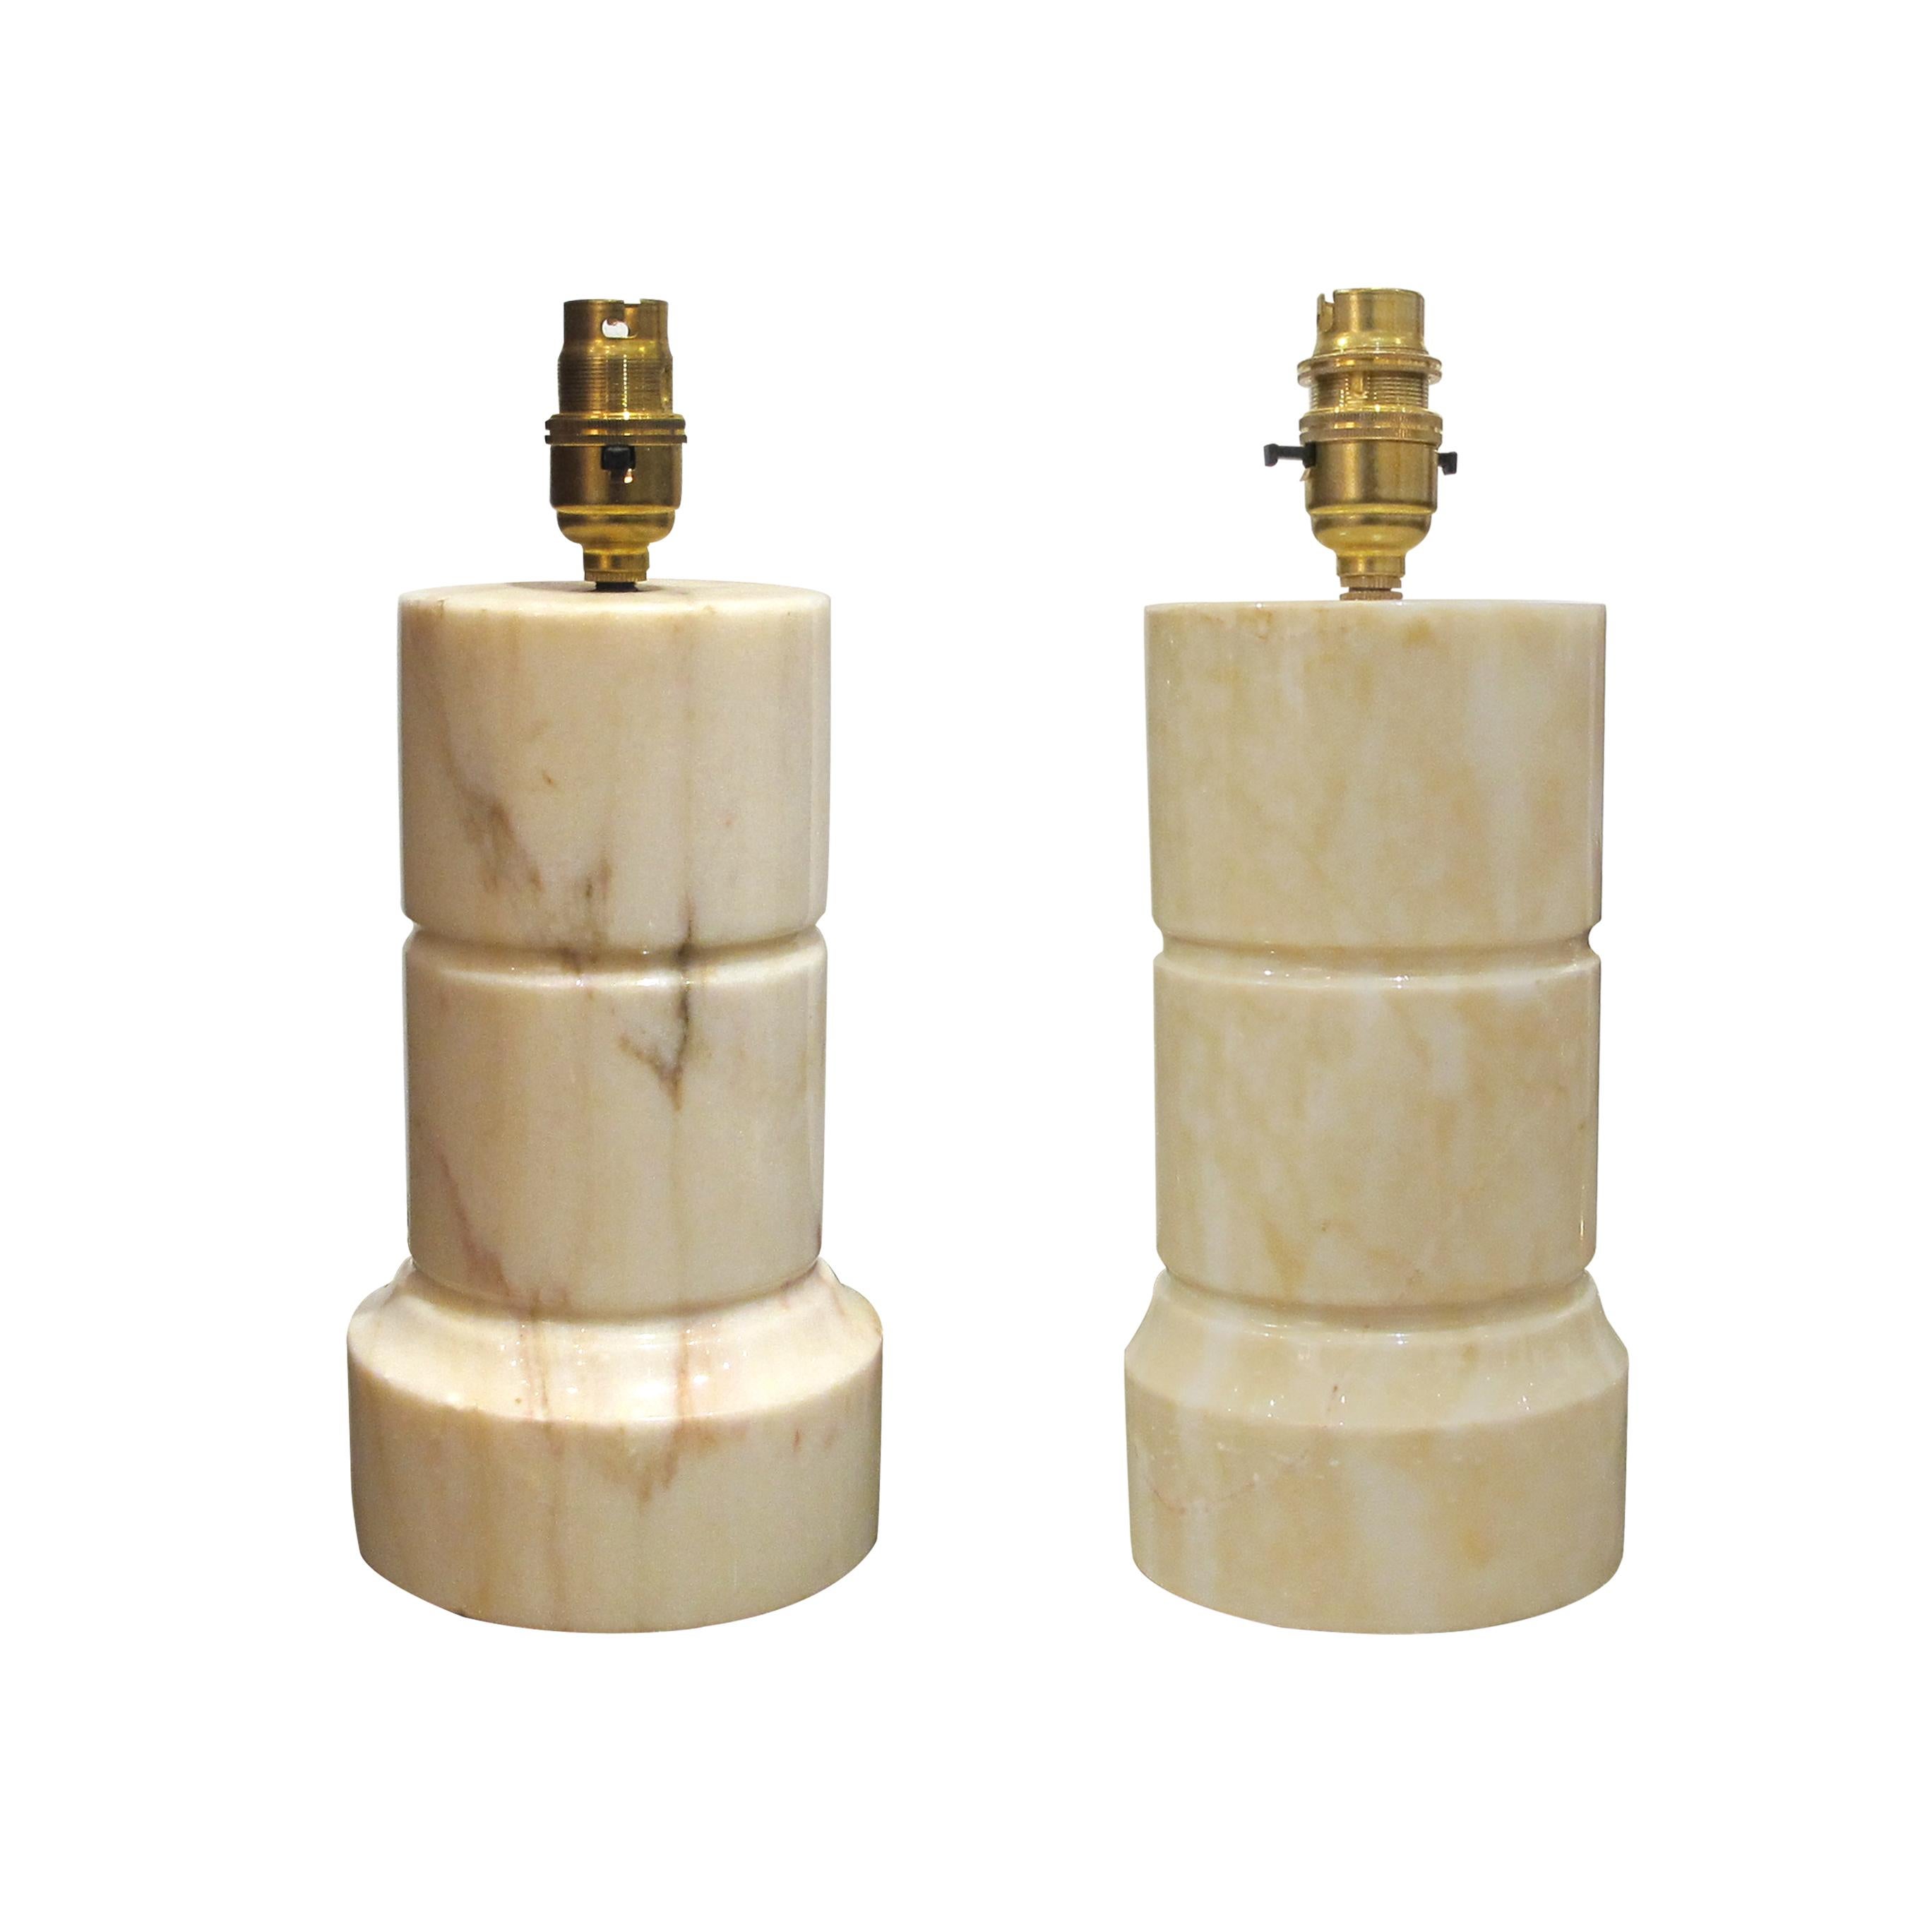 This elegant pair of table lamps is a perfect example of Italian design from the 1960s. The cream marble bases are cylindrical and have a smooth, polished finish. The pair of lamps are complimented with soft pink linen lampshades. The lamps are